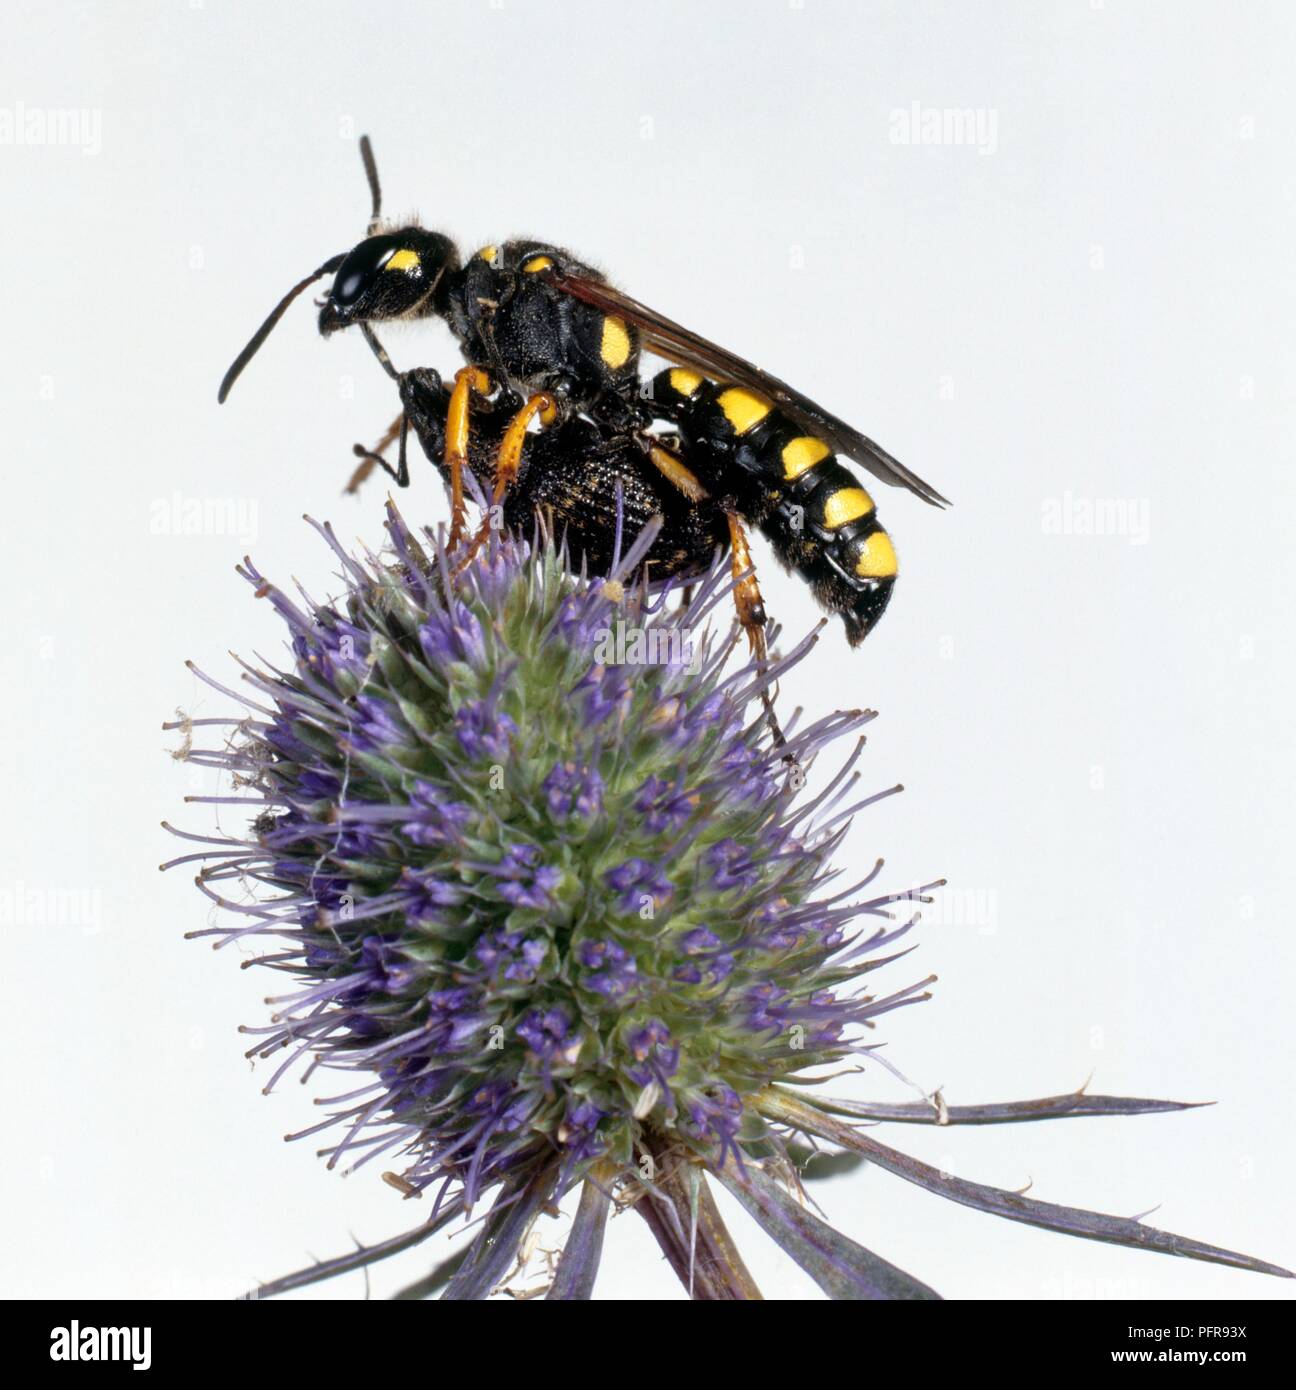 Weevil wasp (Cerceris sp.) attacking weevil on flower, close-up Stock Photo